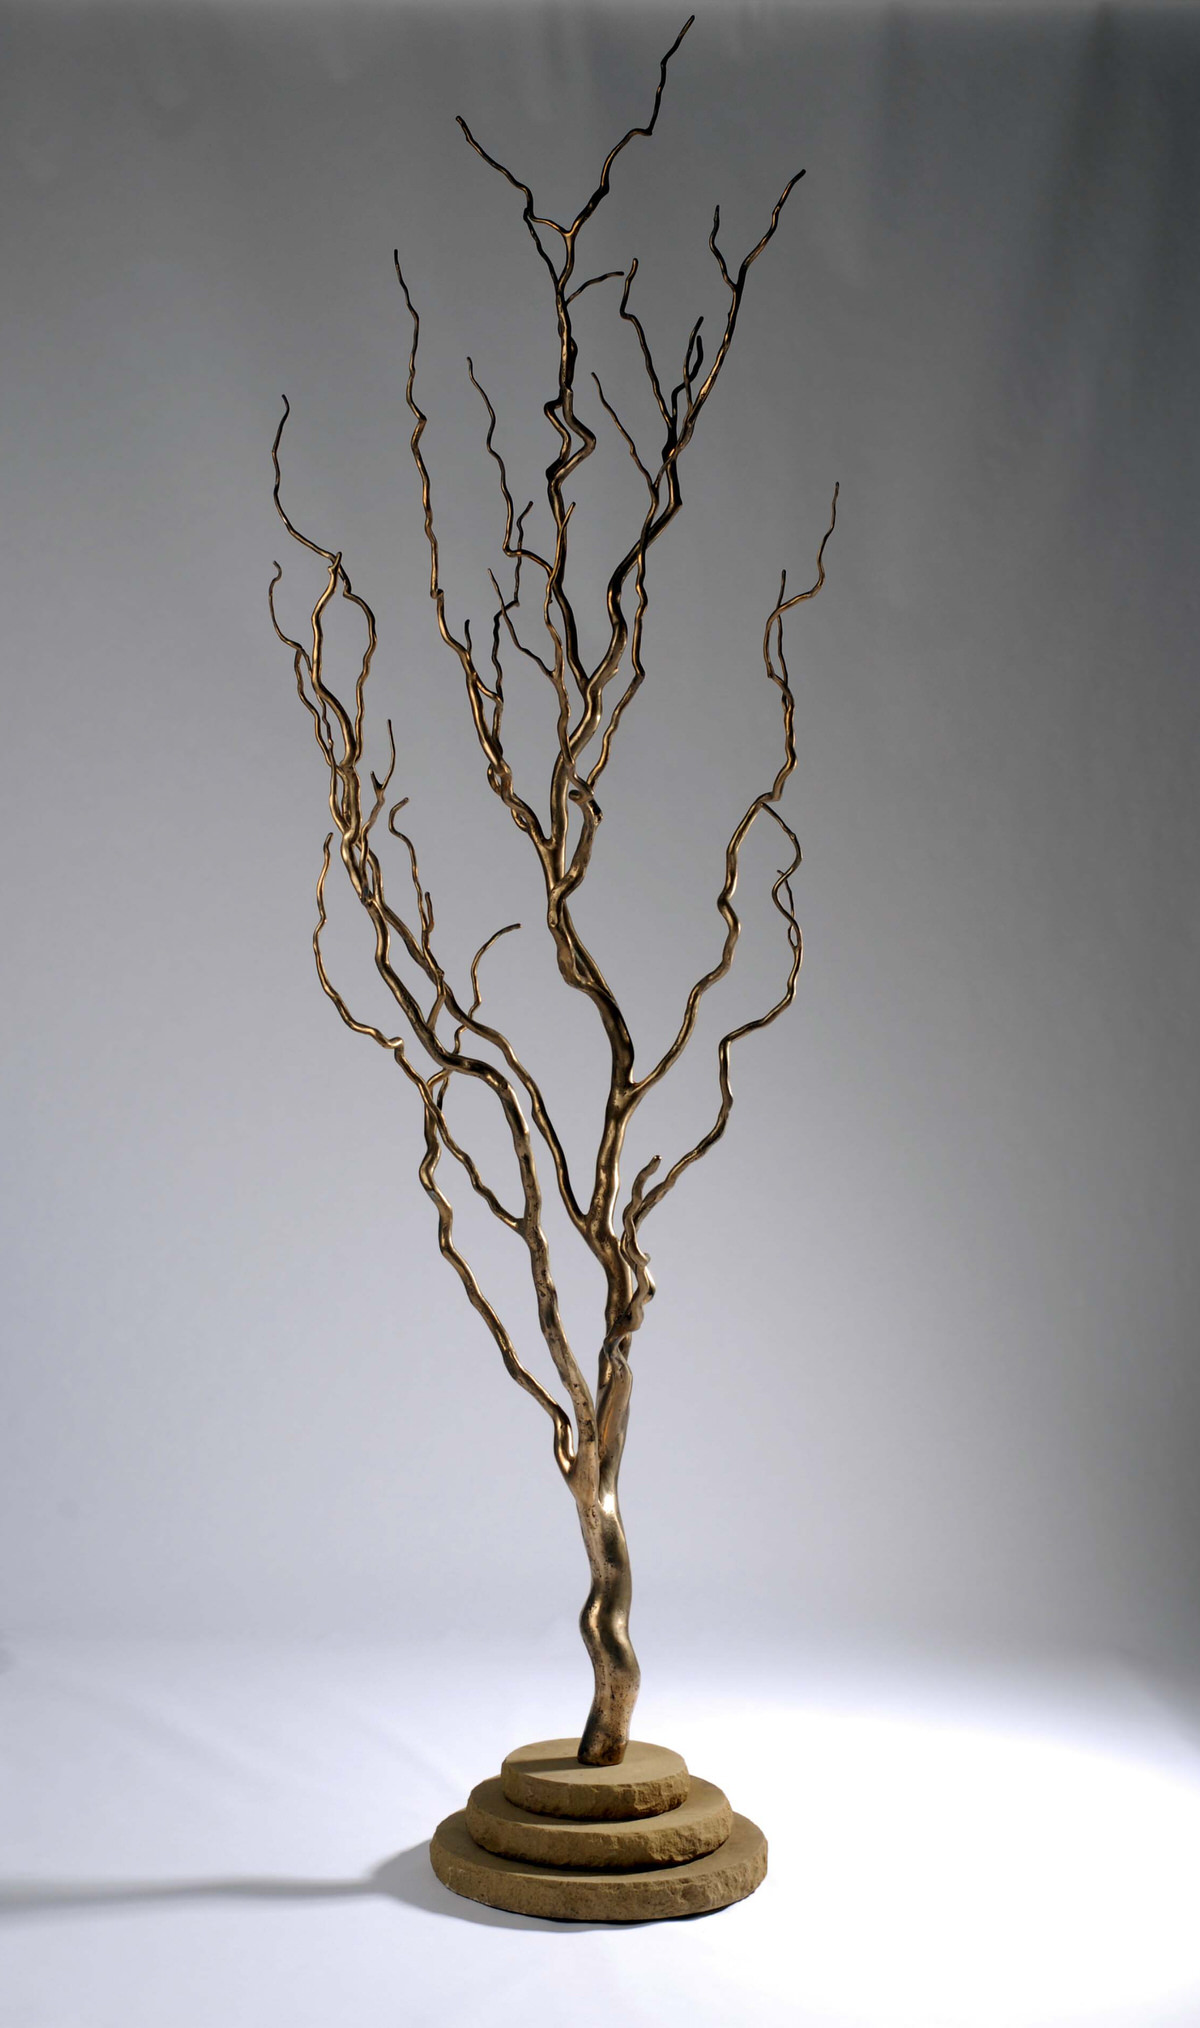 Willow Tree sculpture bronze sculpture for gardens sculpture for public spaces corporate sculpture tree design trees art indoor trees design offices by Mark Reed